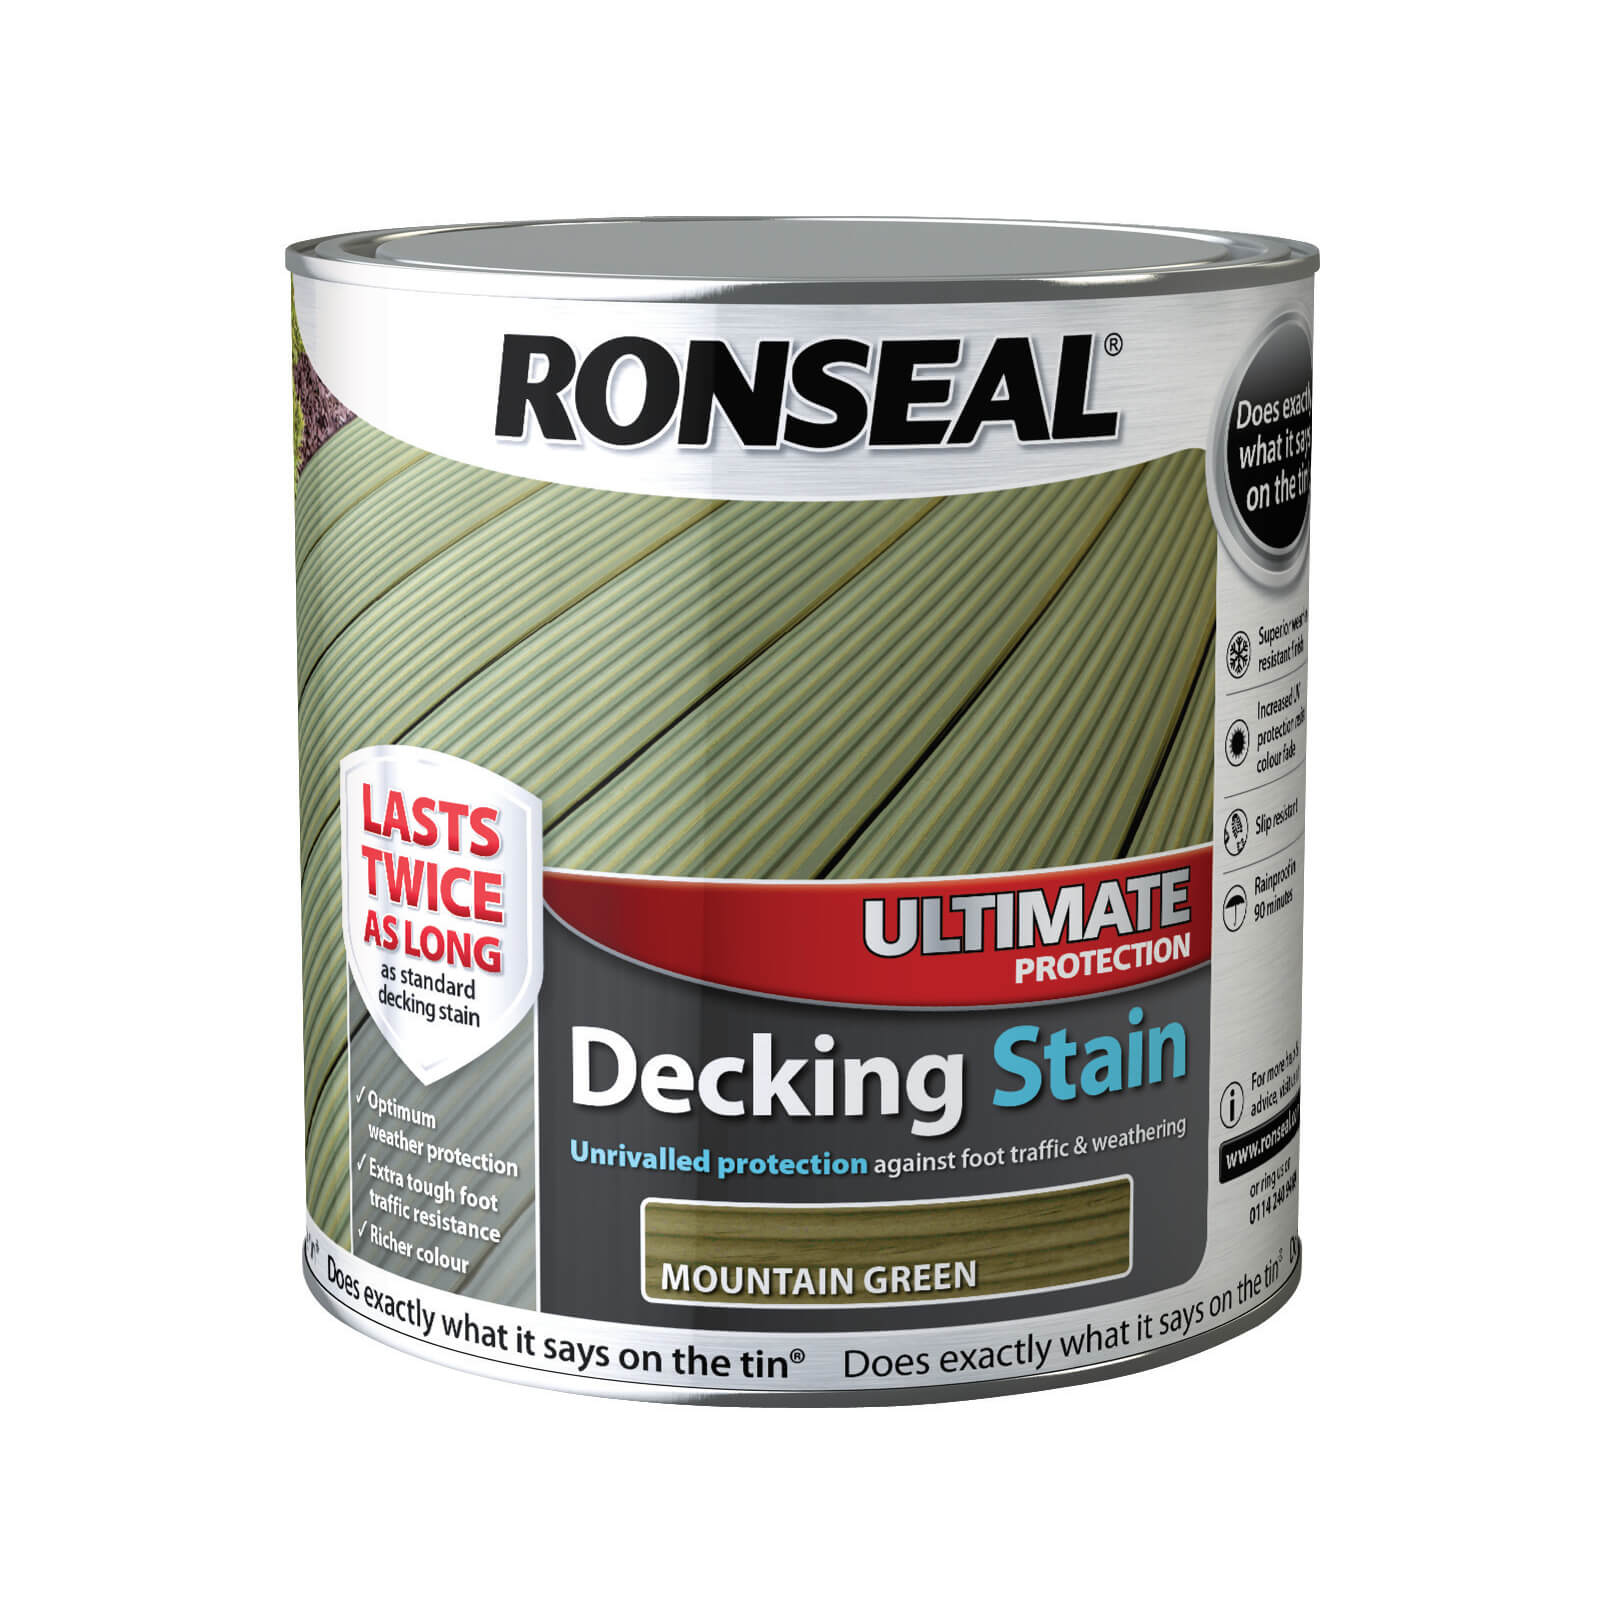 C23 RONSEAL ULT PROTECTION DECK STAIN M.